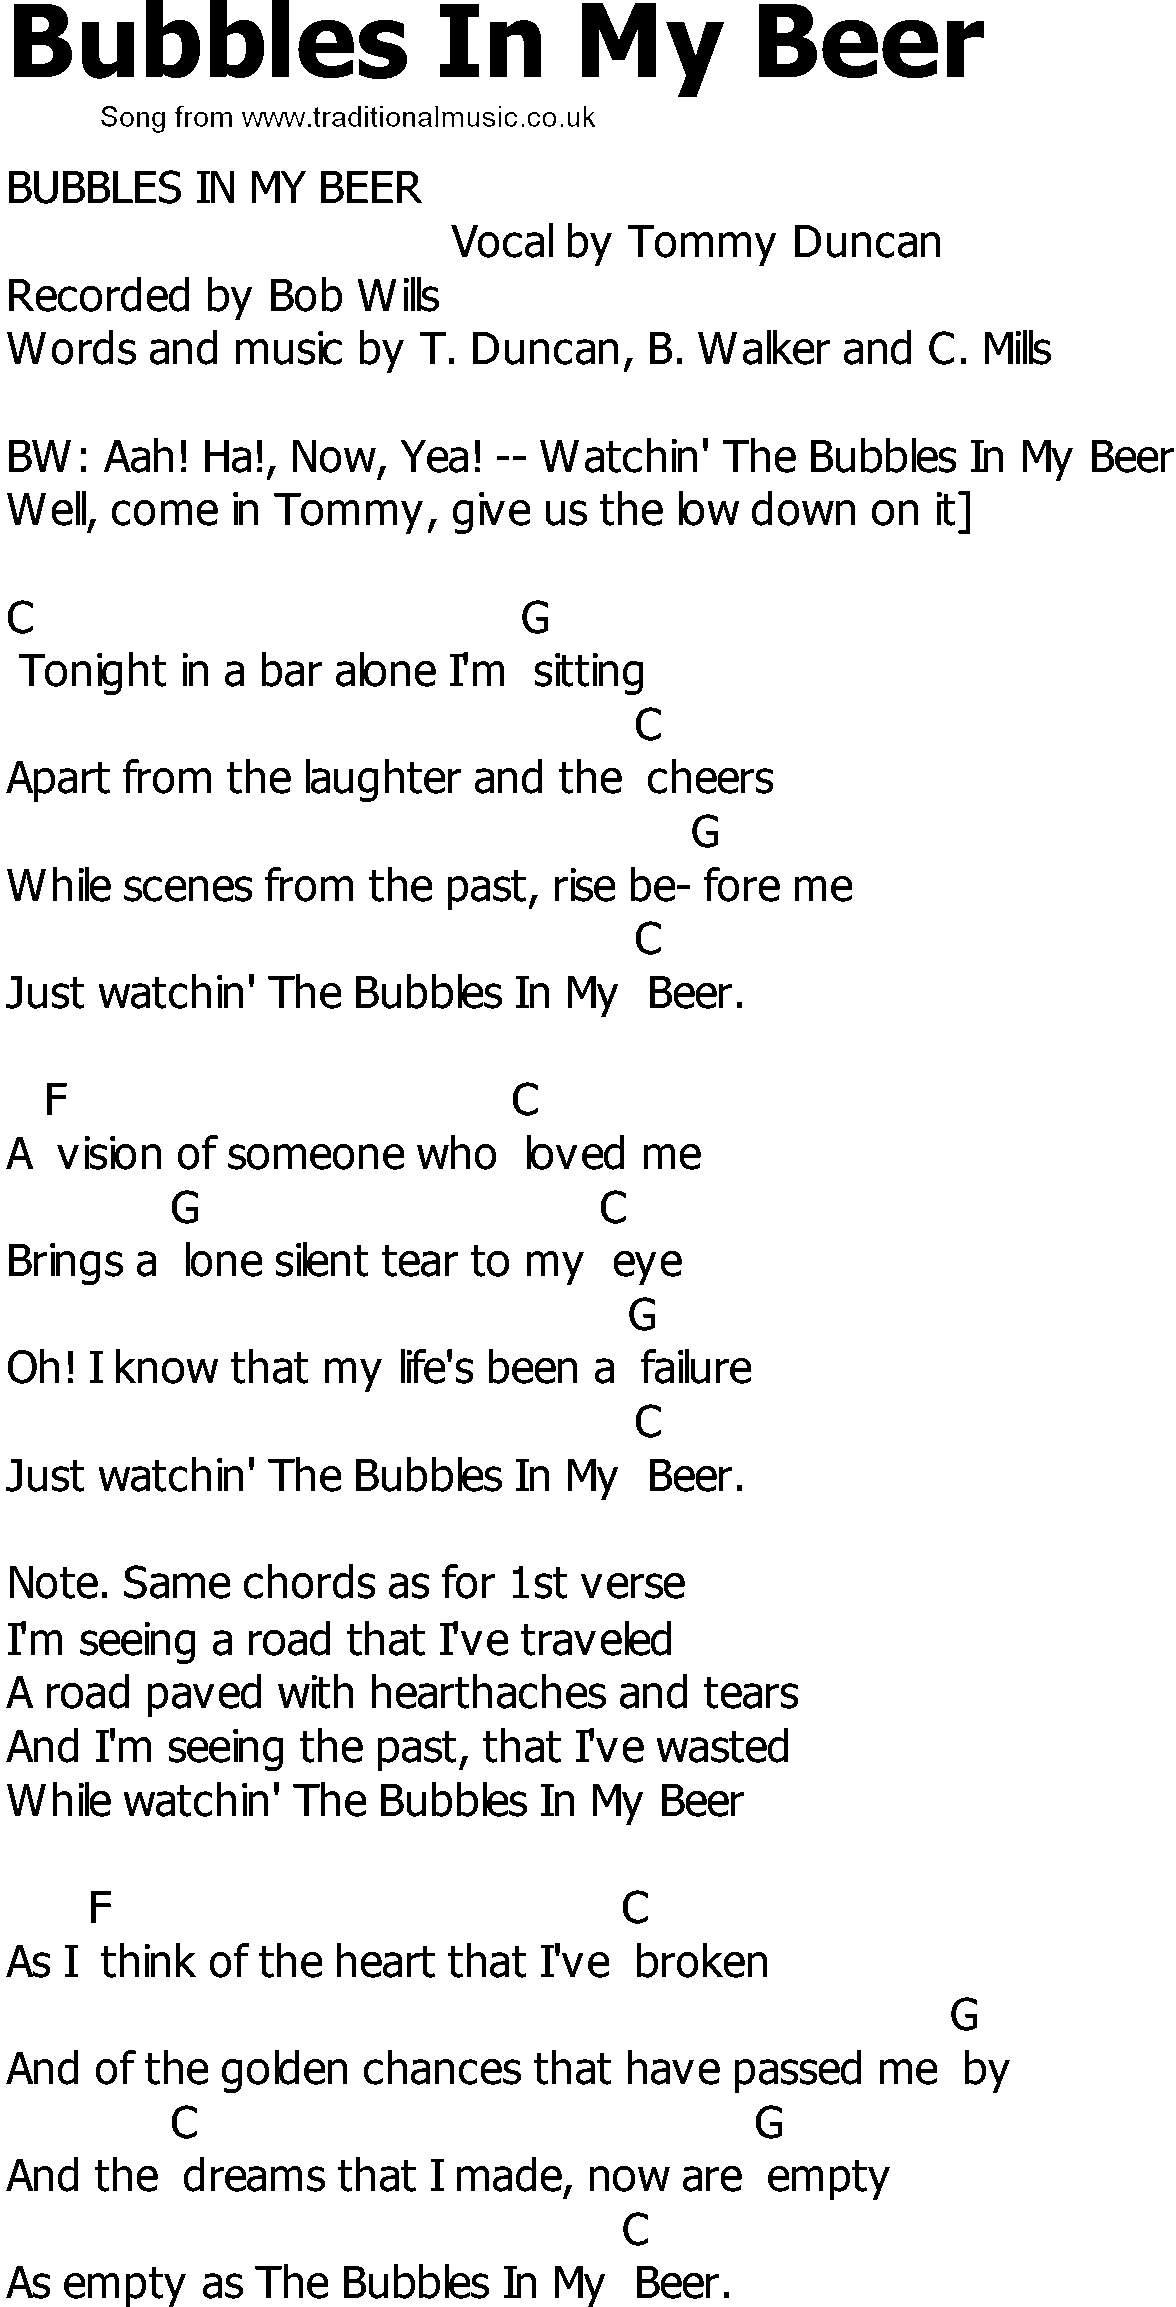 Old Country song lyrics with chords - Bubbles In My Beer